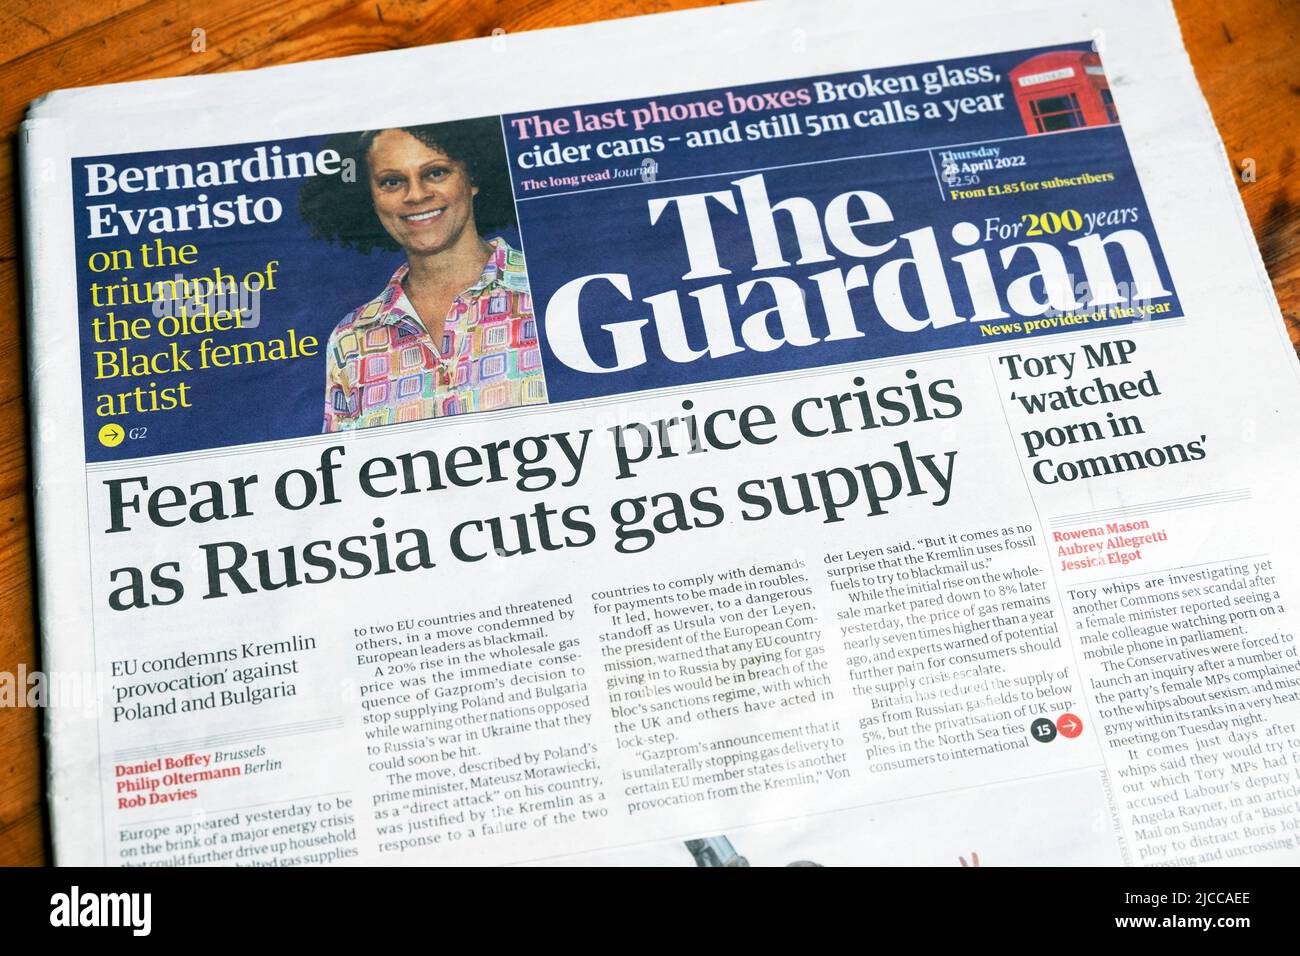 'Fear of energy price crisis as Russia cuts gas supply' Guardian newspaper front page headline on 28 April 2022 London UK Stock Photo